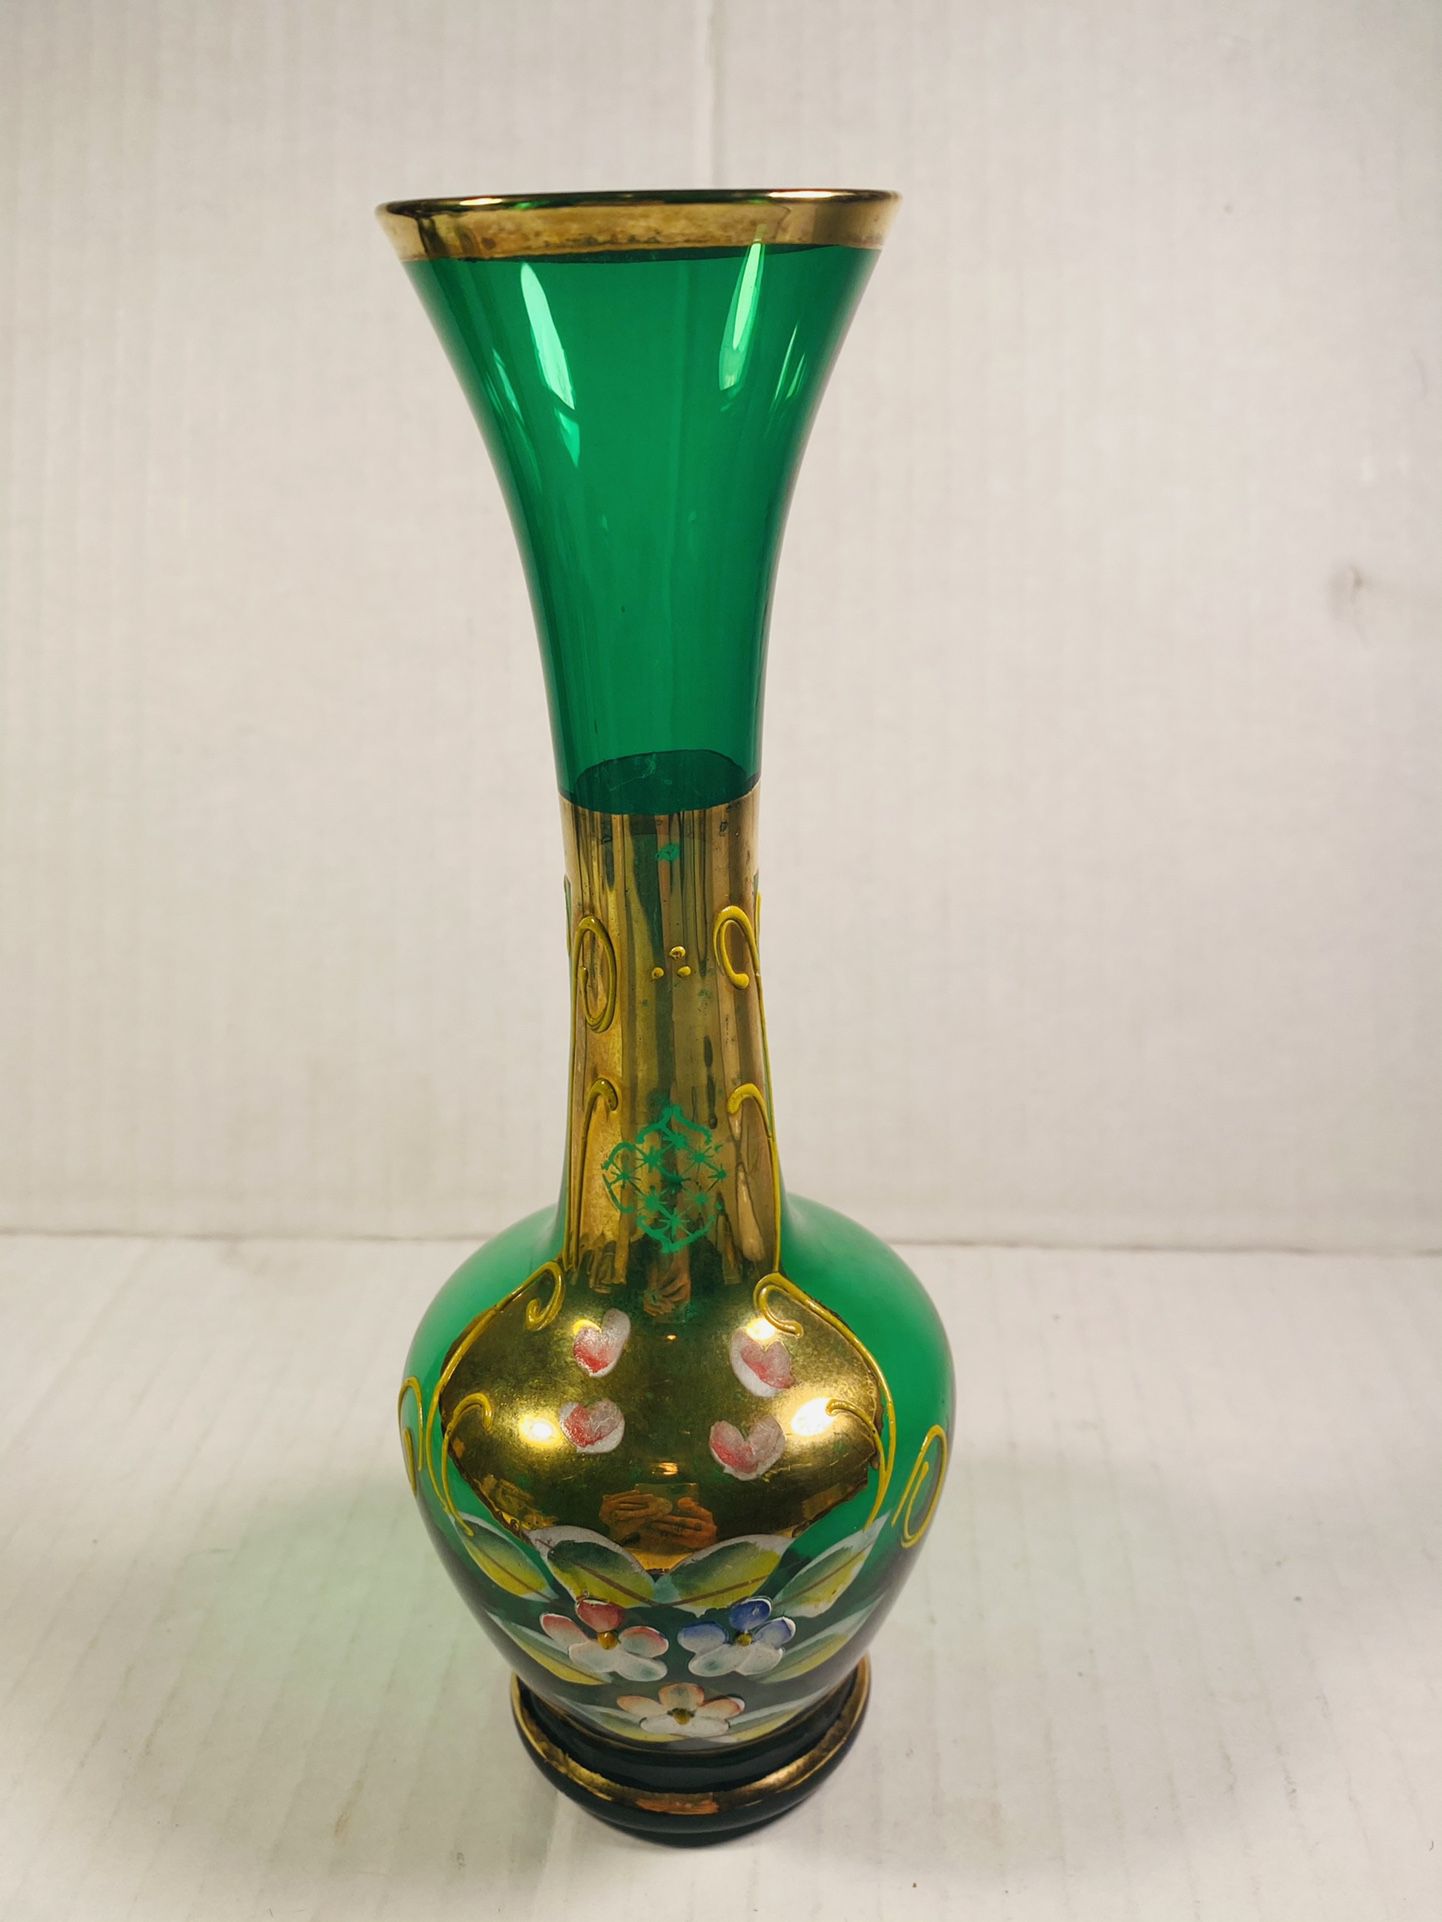 VINTAGE HAND BLOWN BOHEMIAN GLASS VASE EMERALD GREEN WITH 24KT GOLD AND HAND PAINTED ENAMEL FLOWERS 